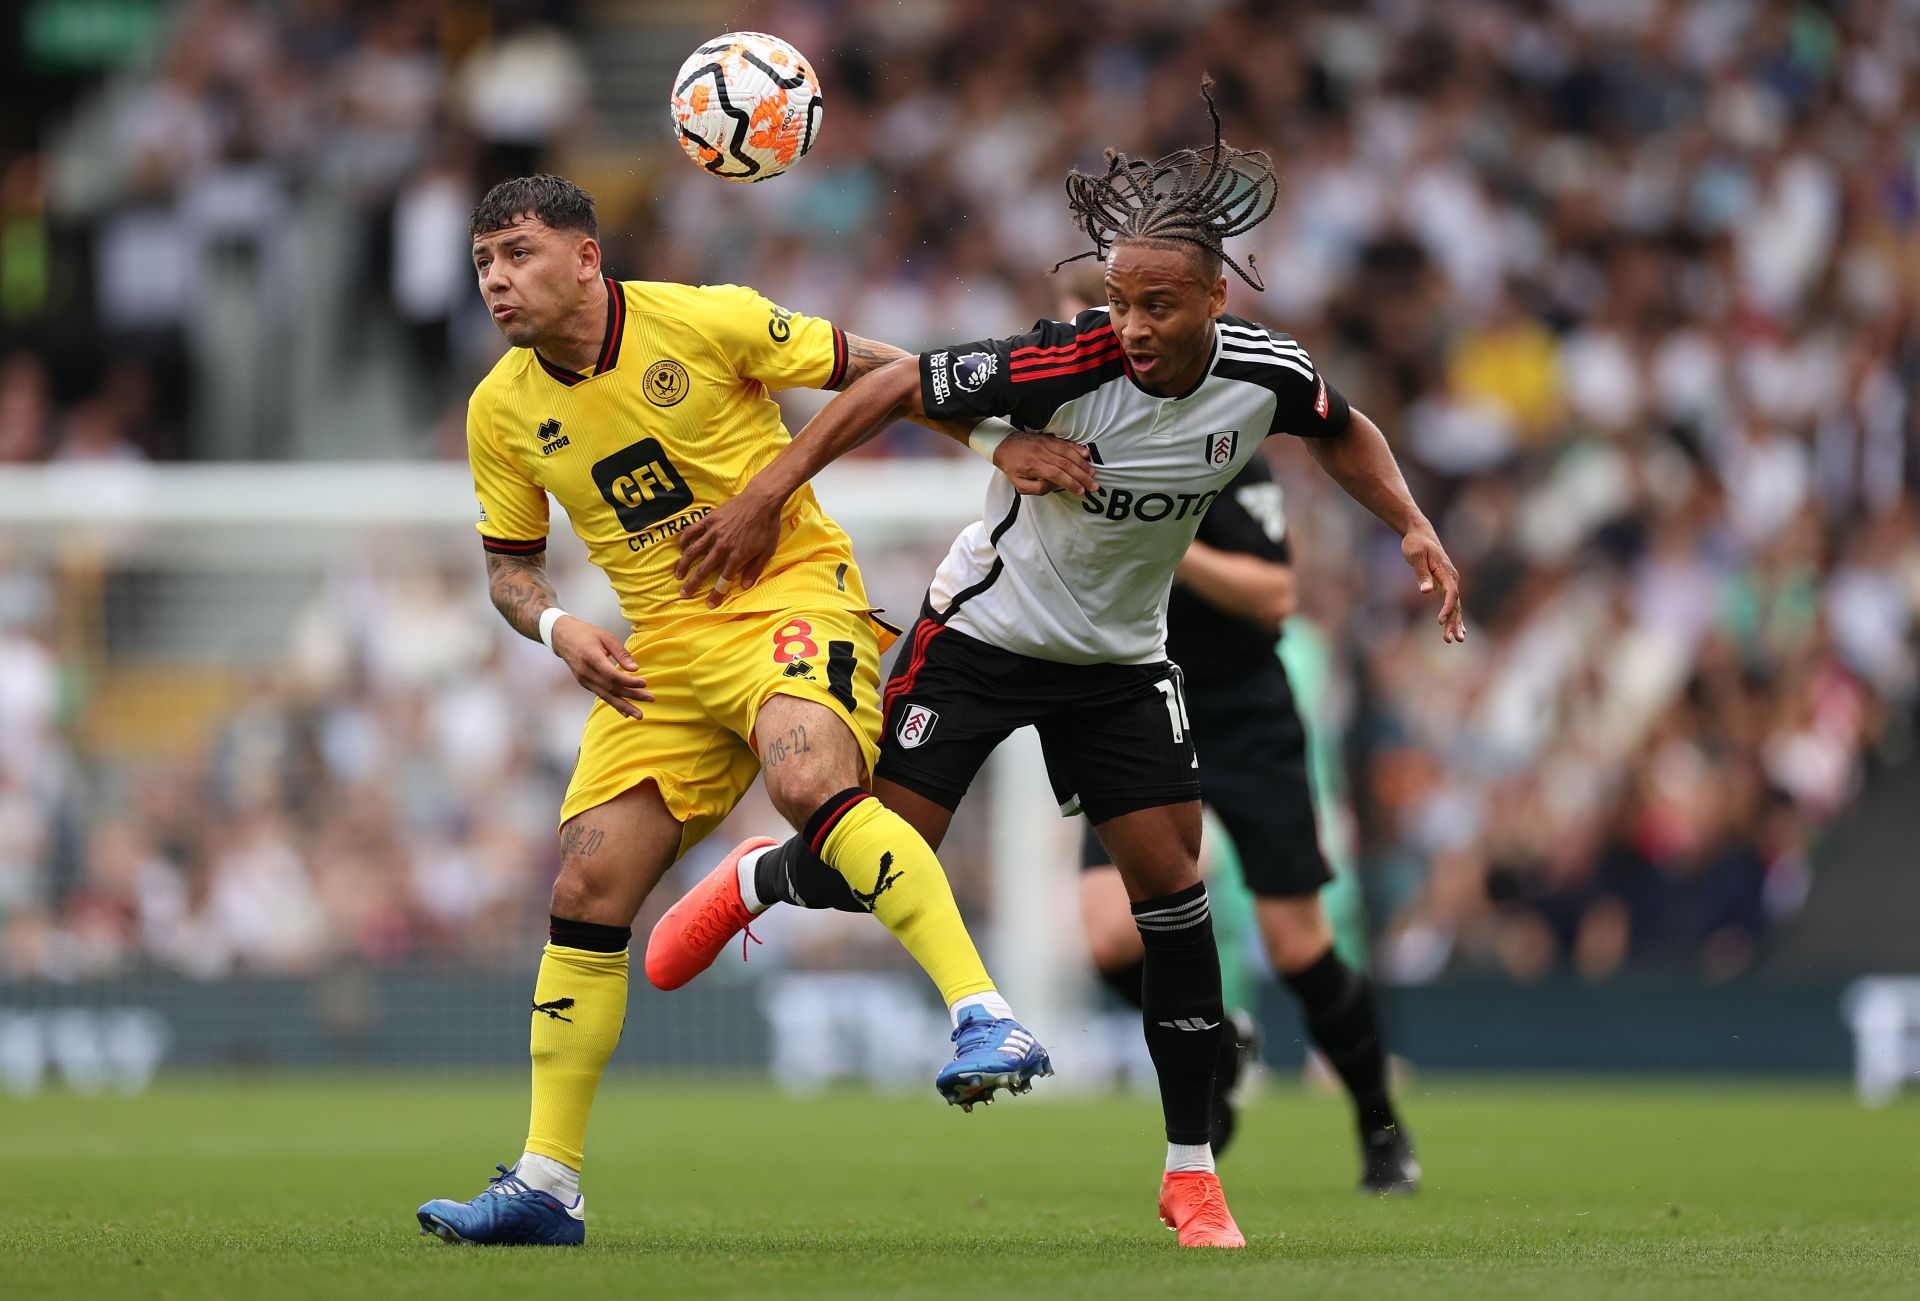 Fulham take on Sheffield United this weekend